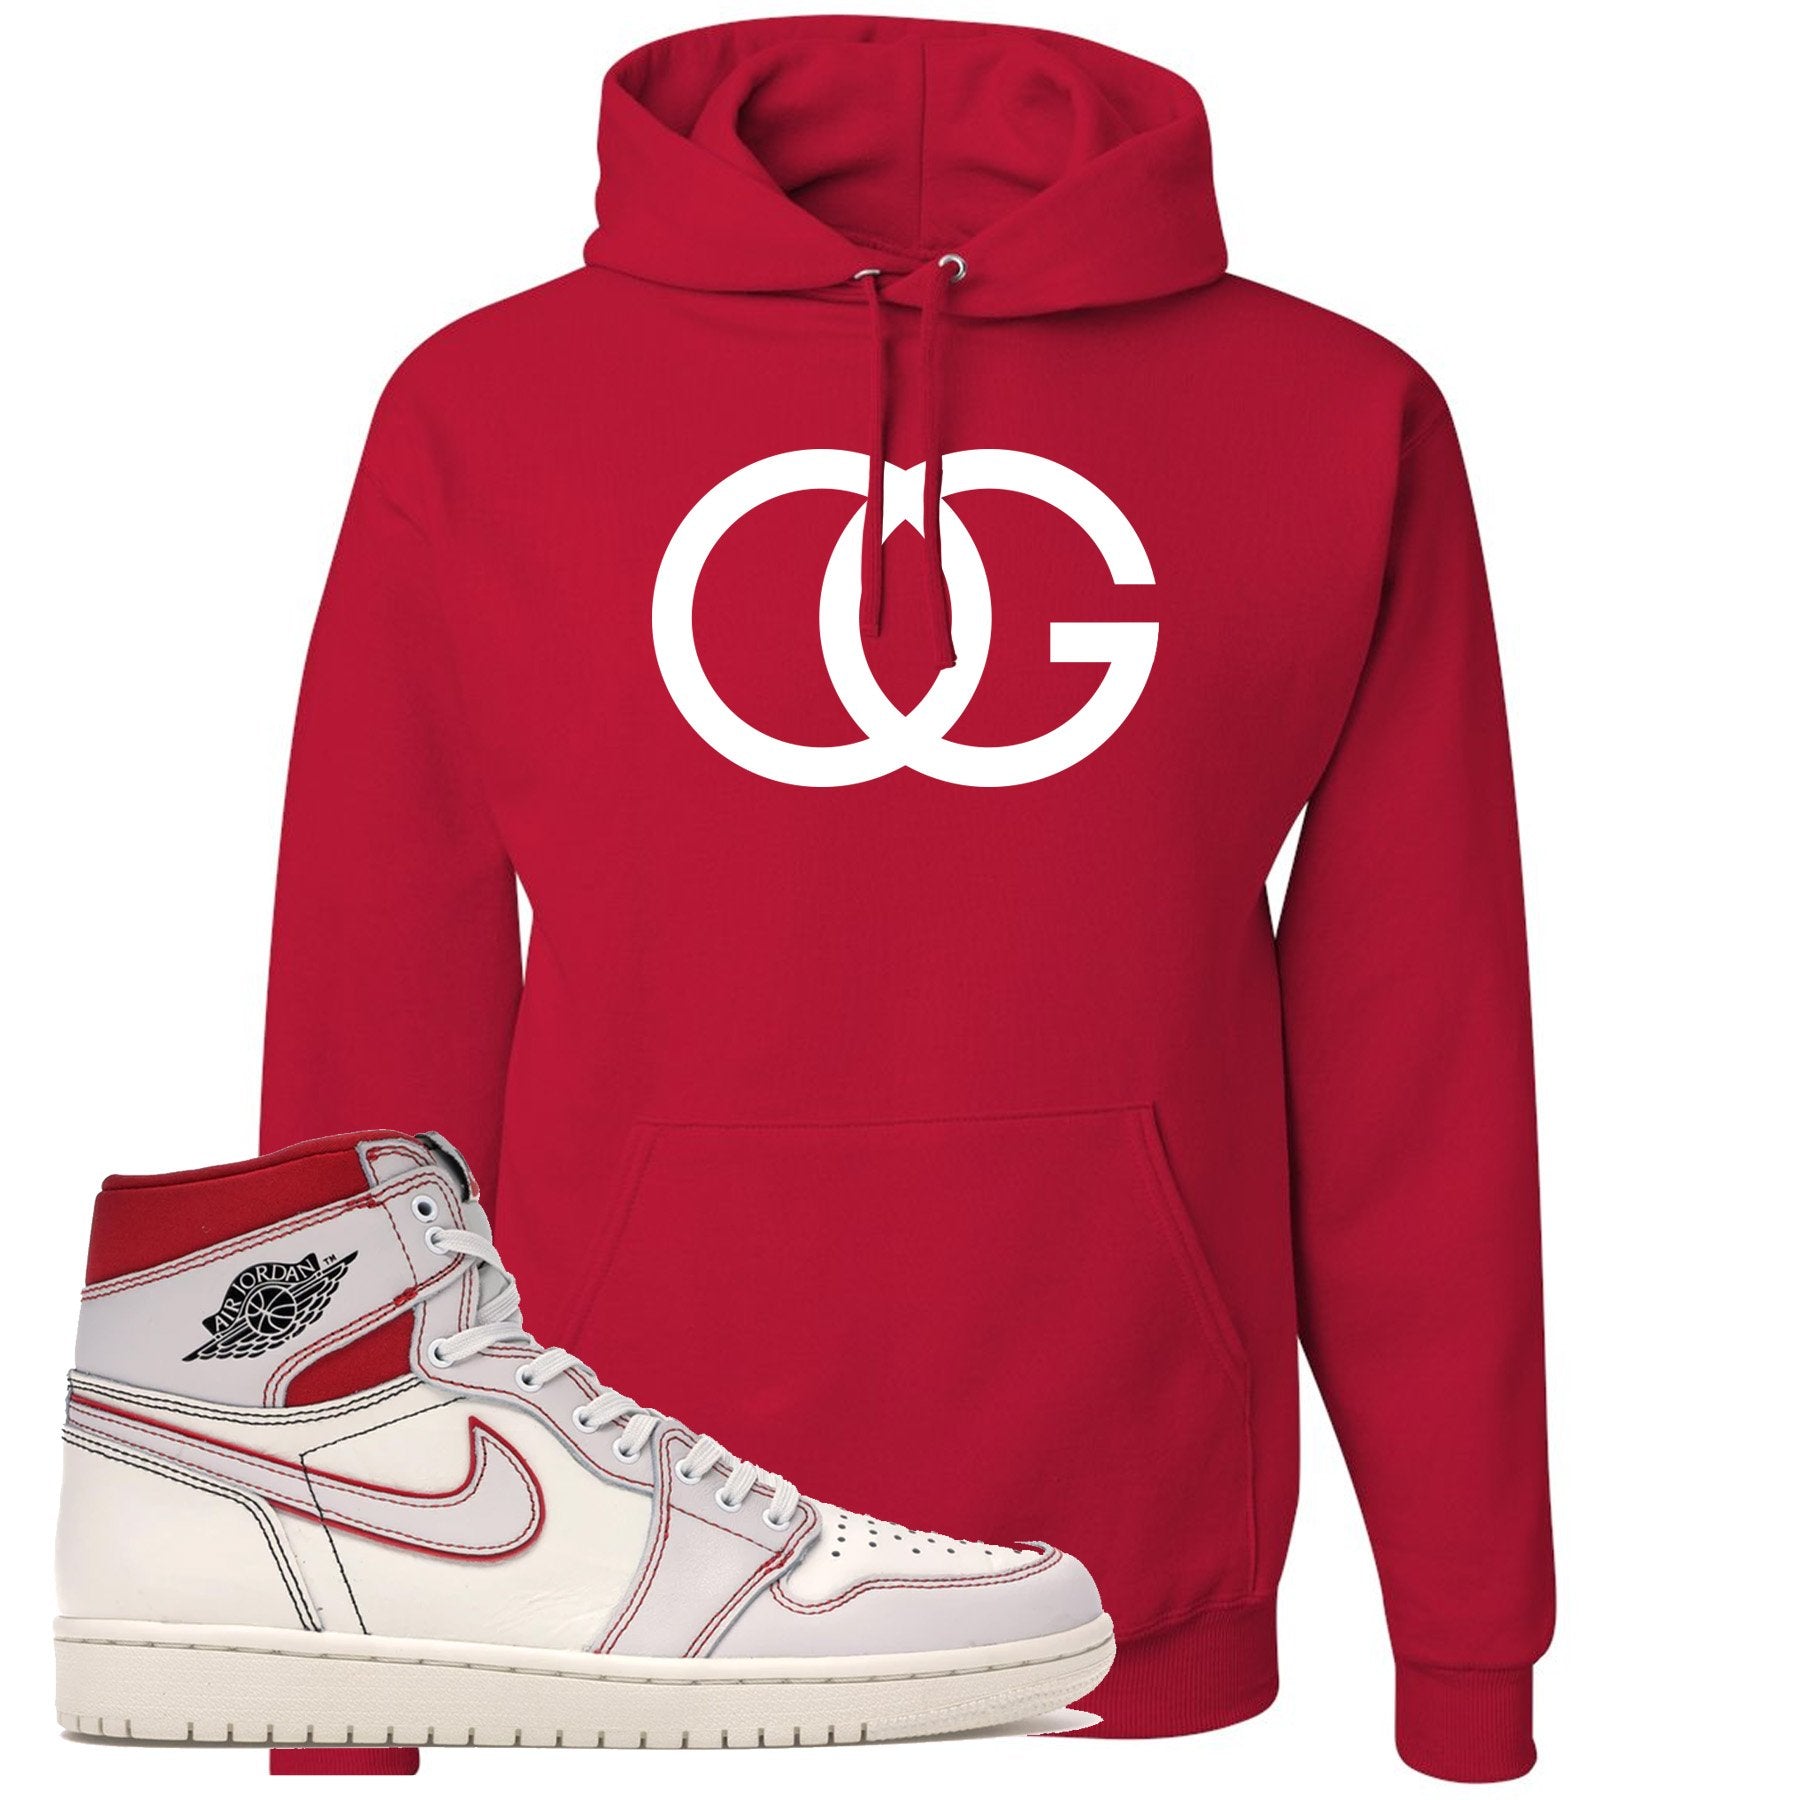 Red and white hoodie to match the white and red High Retro Jordan 1 shoe